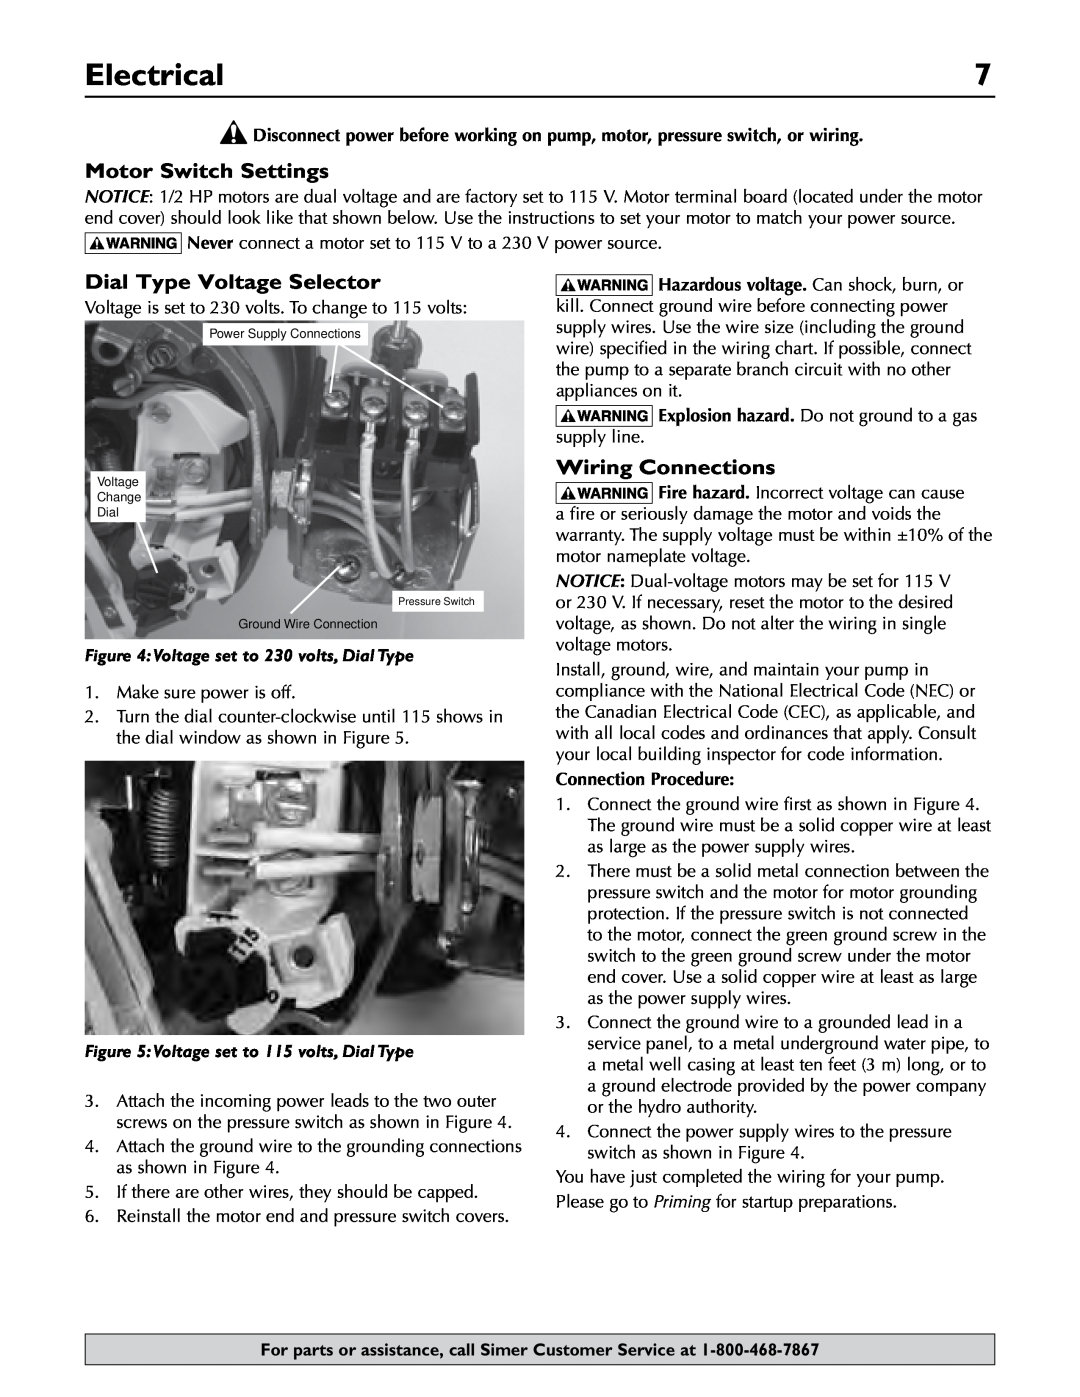 Simer Pumps 2806E owner manual Electrical, Motor Switch Settings, Dial Type Voltage Selector, Wiring Connections 